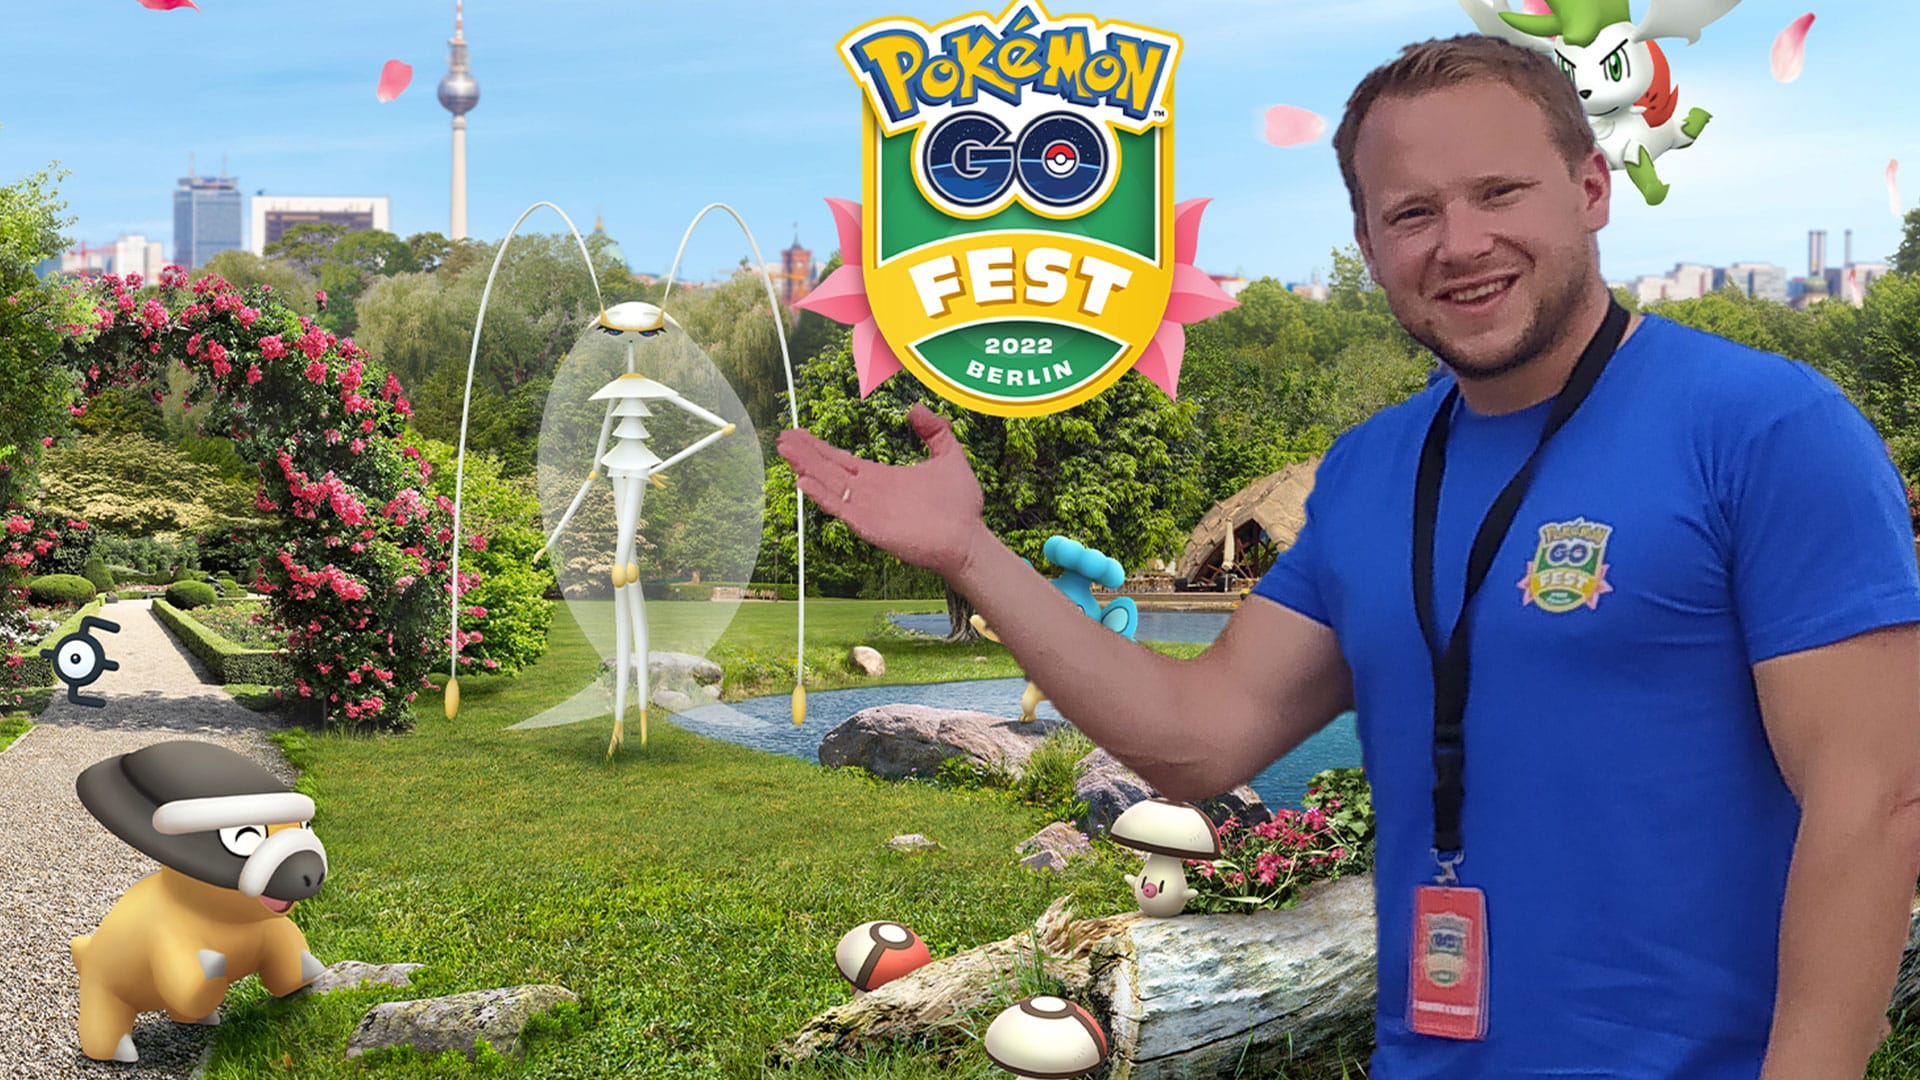 Pokémon GO: Can German players look forward to more live events soon?  We checked with Niantic